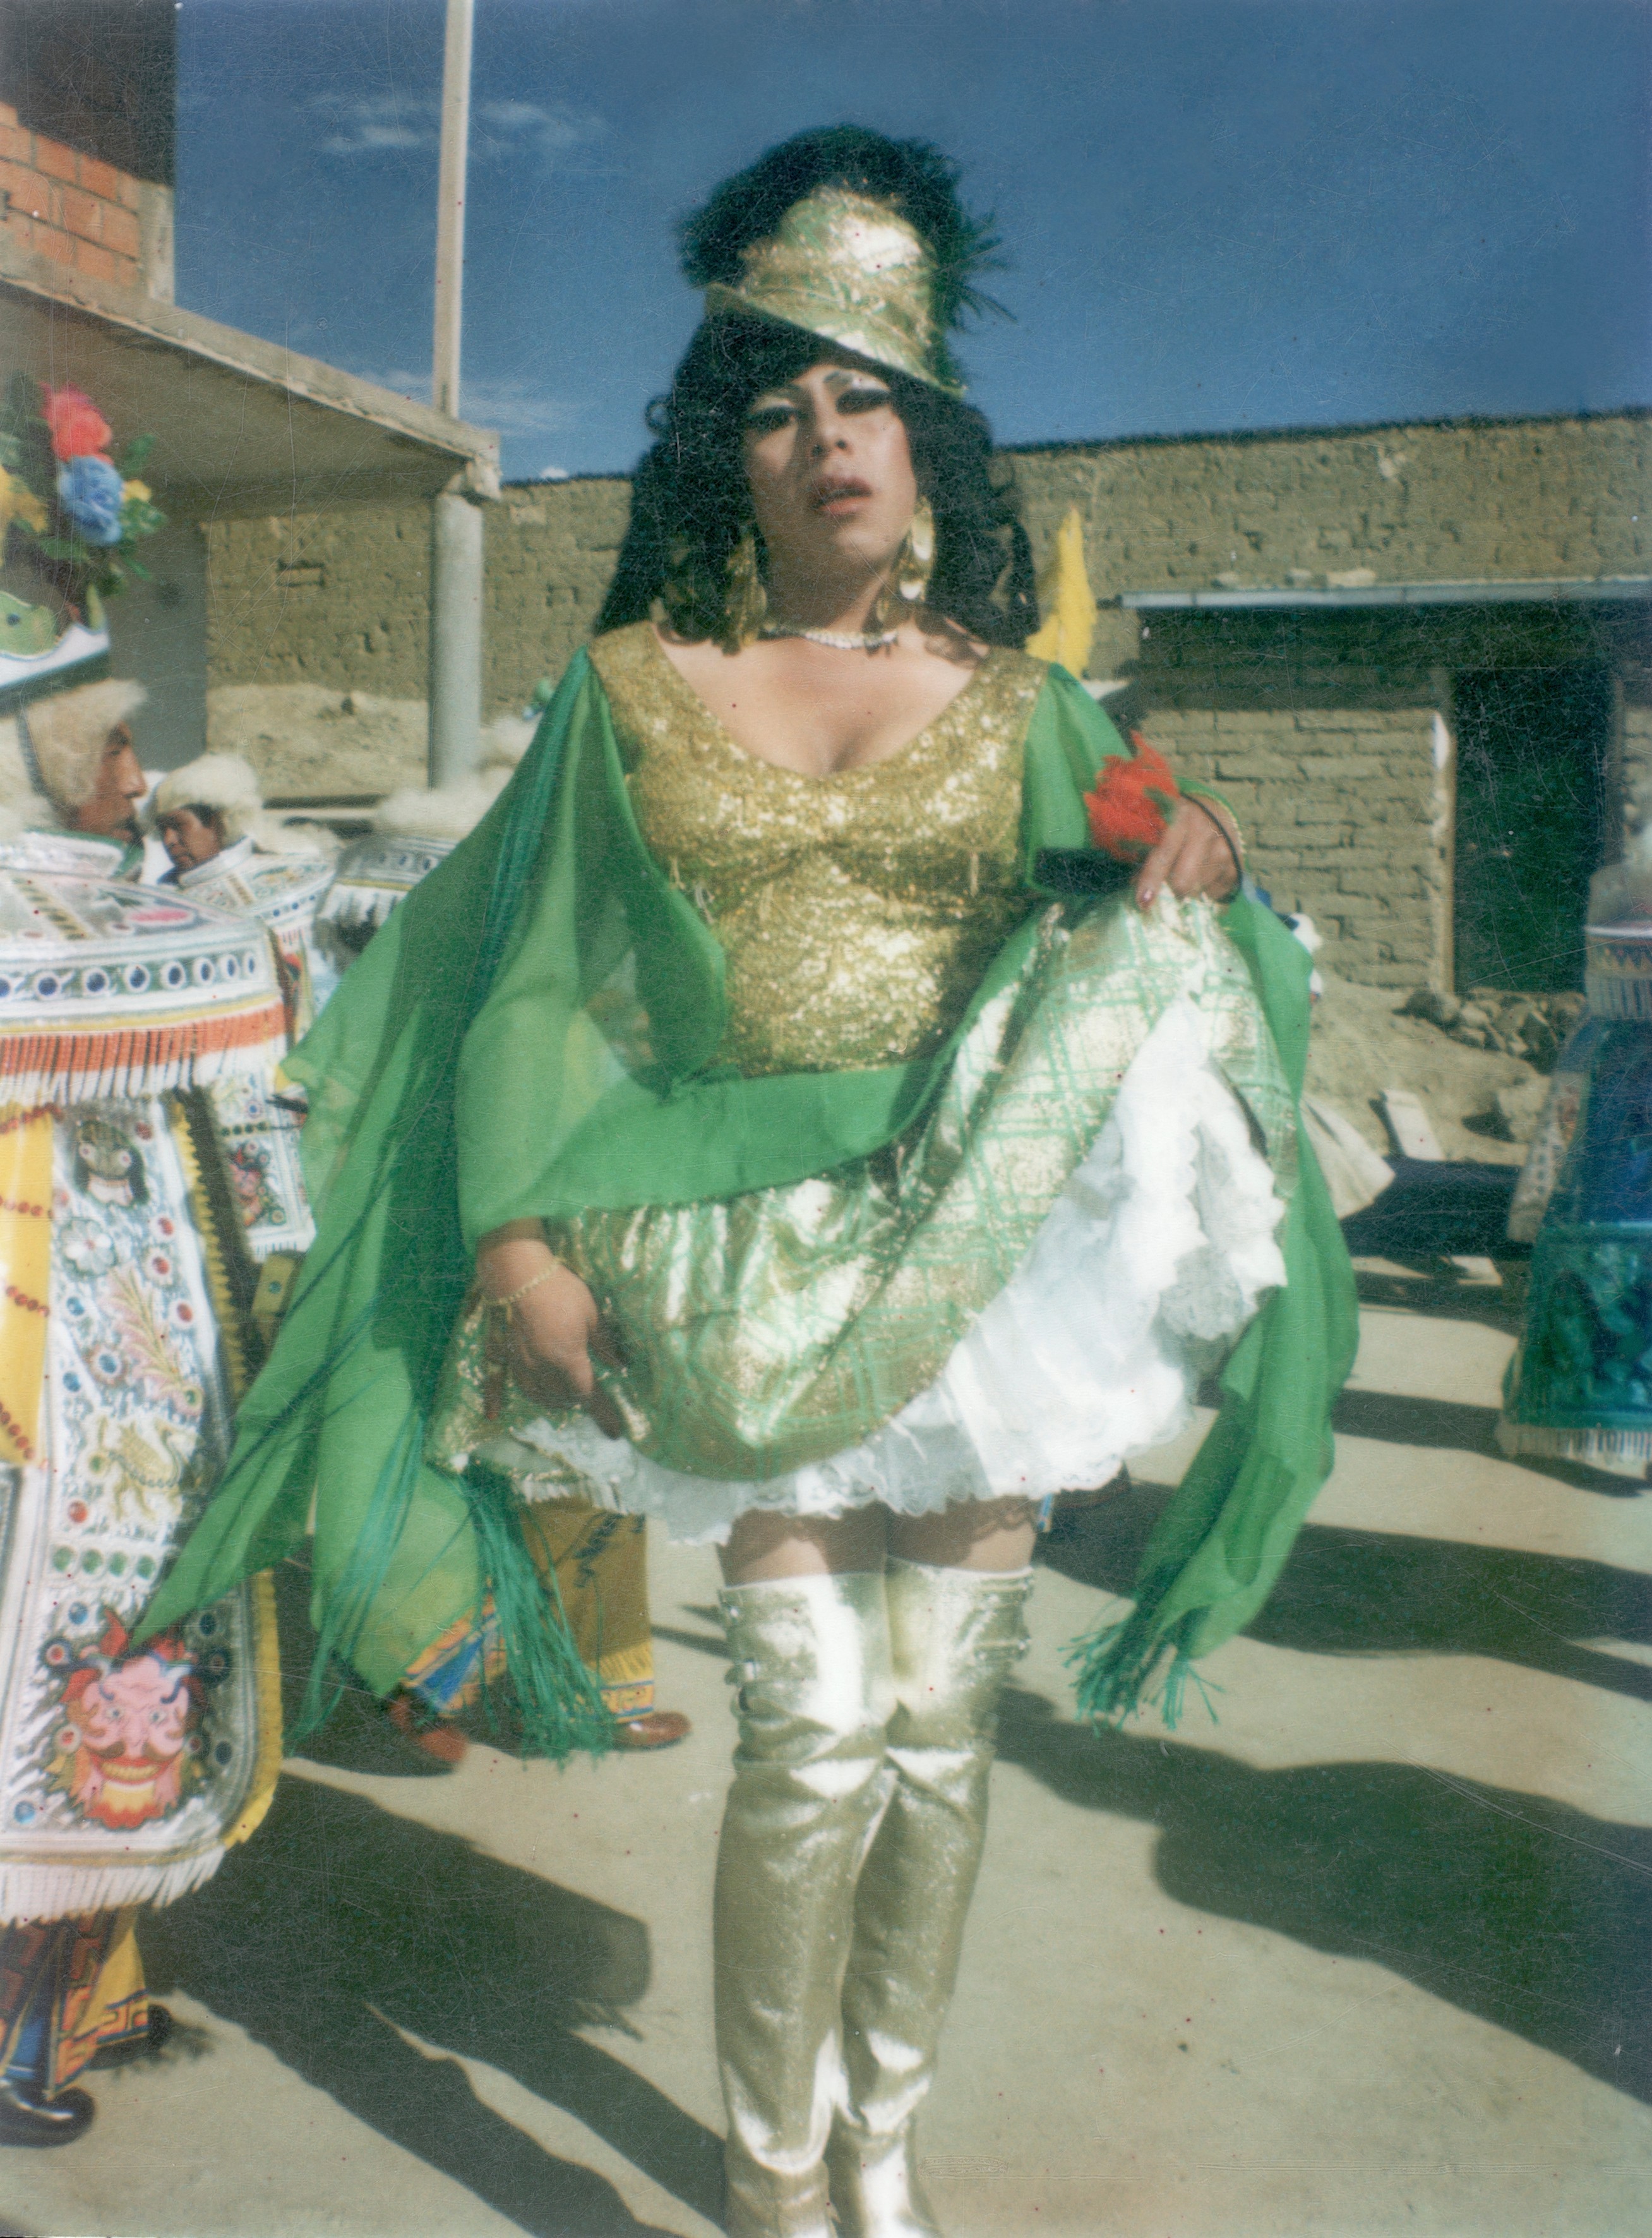 A travesti performer dressed as La China Morena in the streets of La Paz